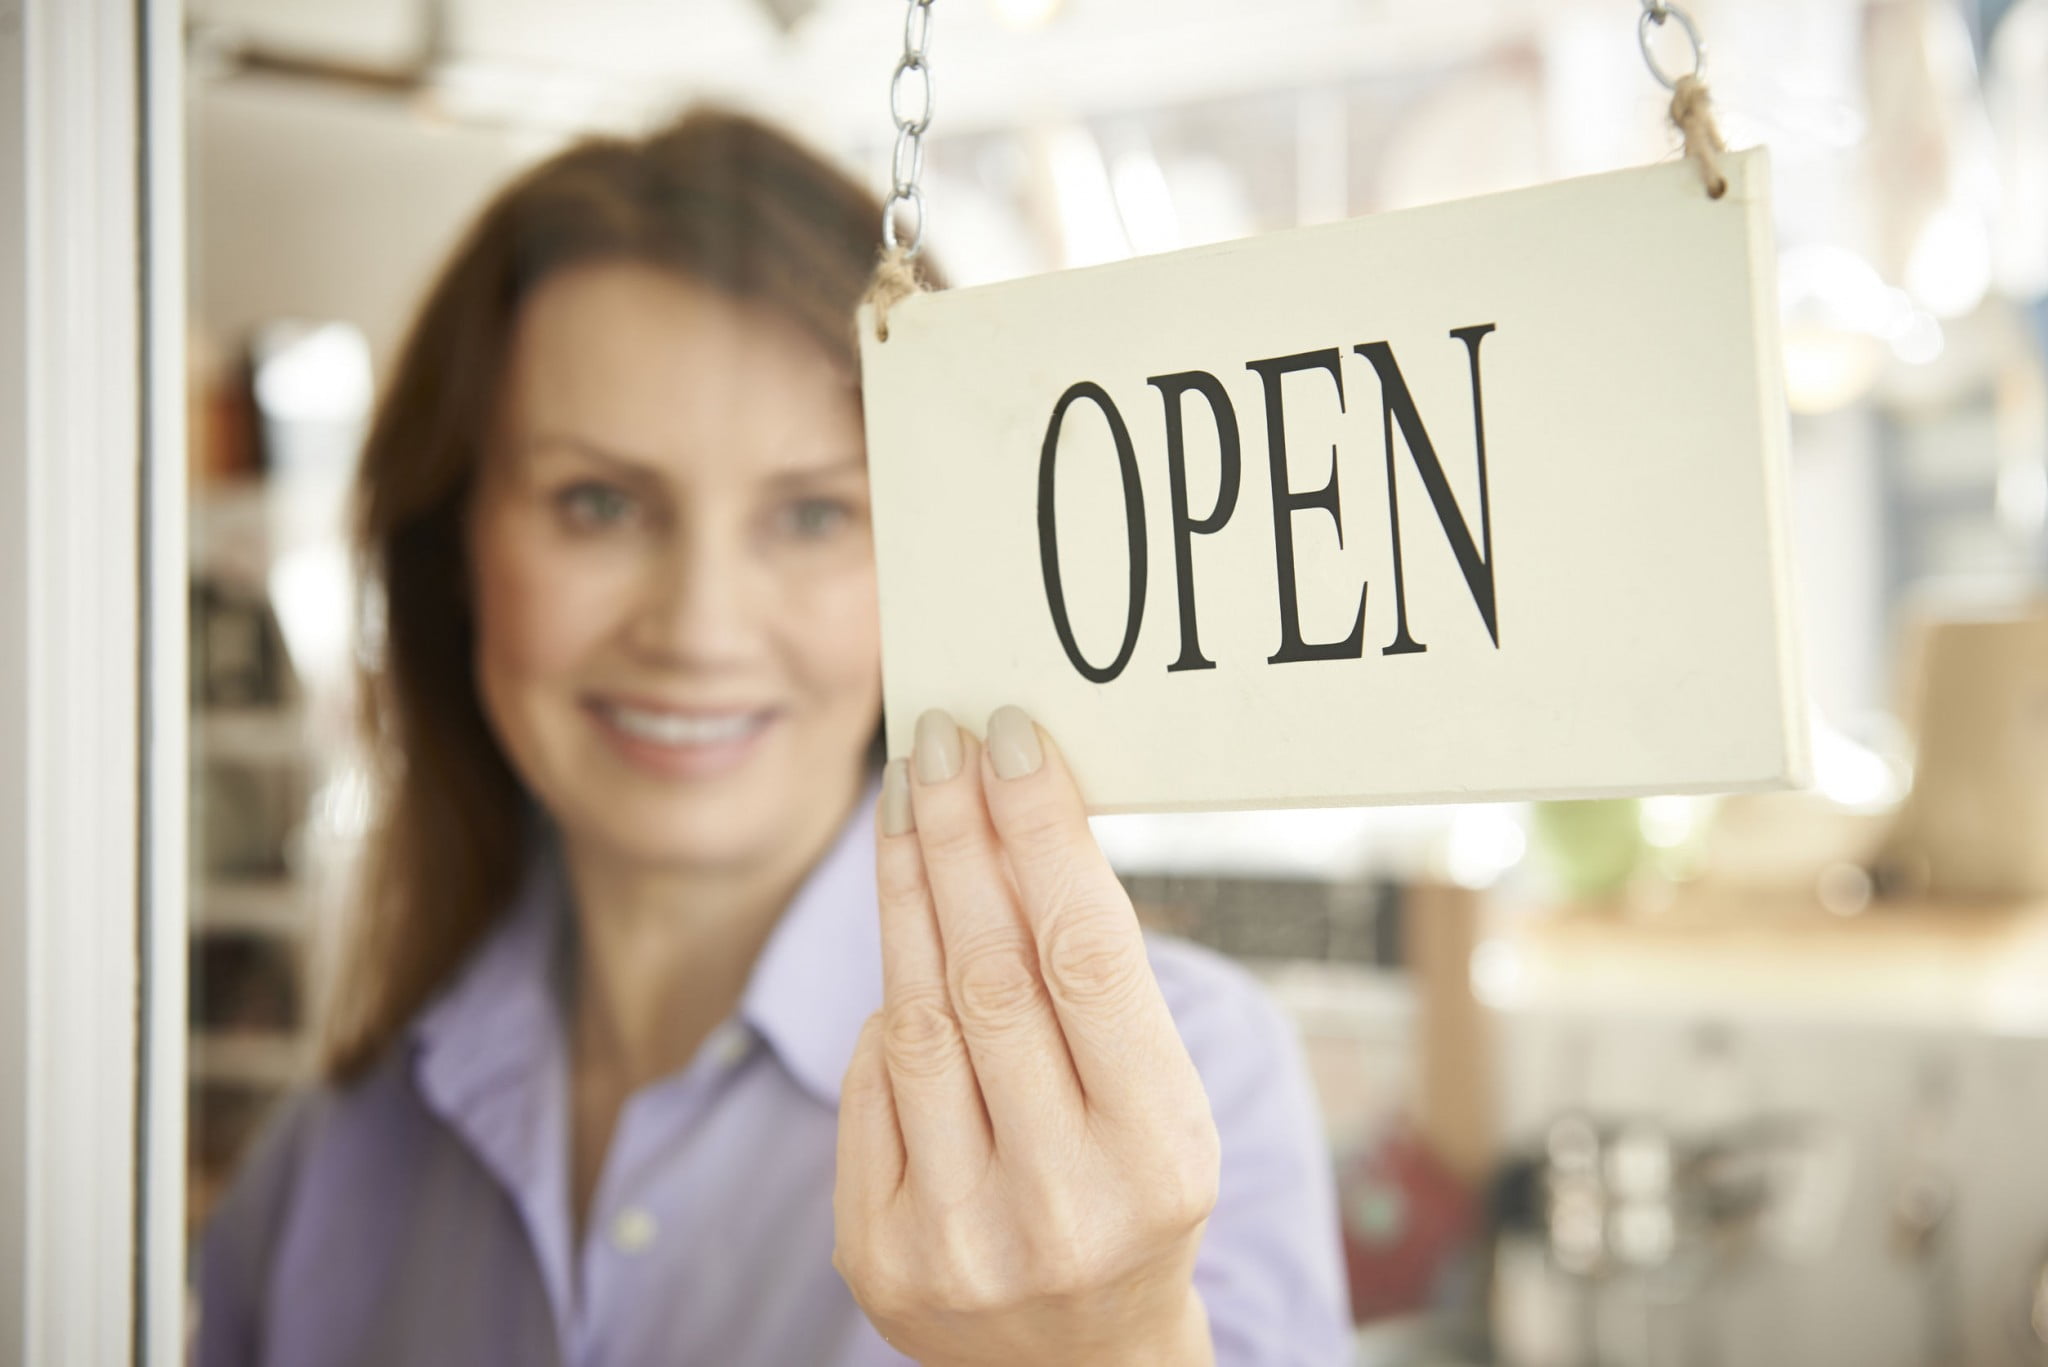 Shop with "open" sign at door - business confidence